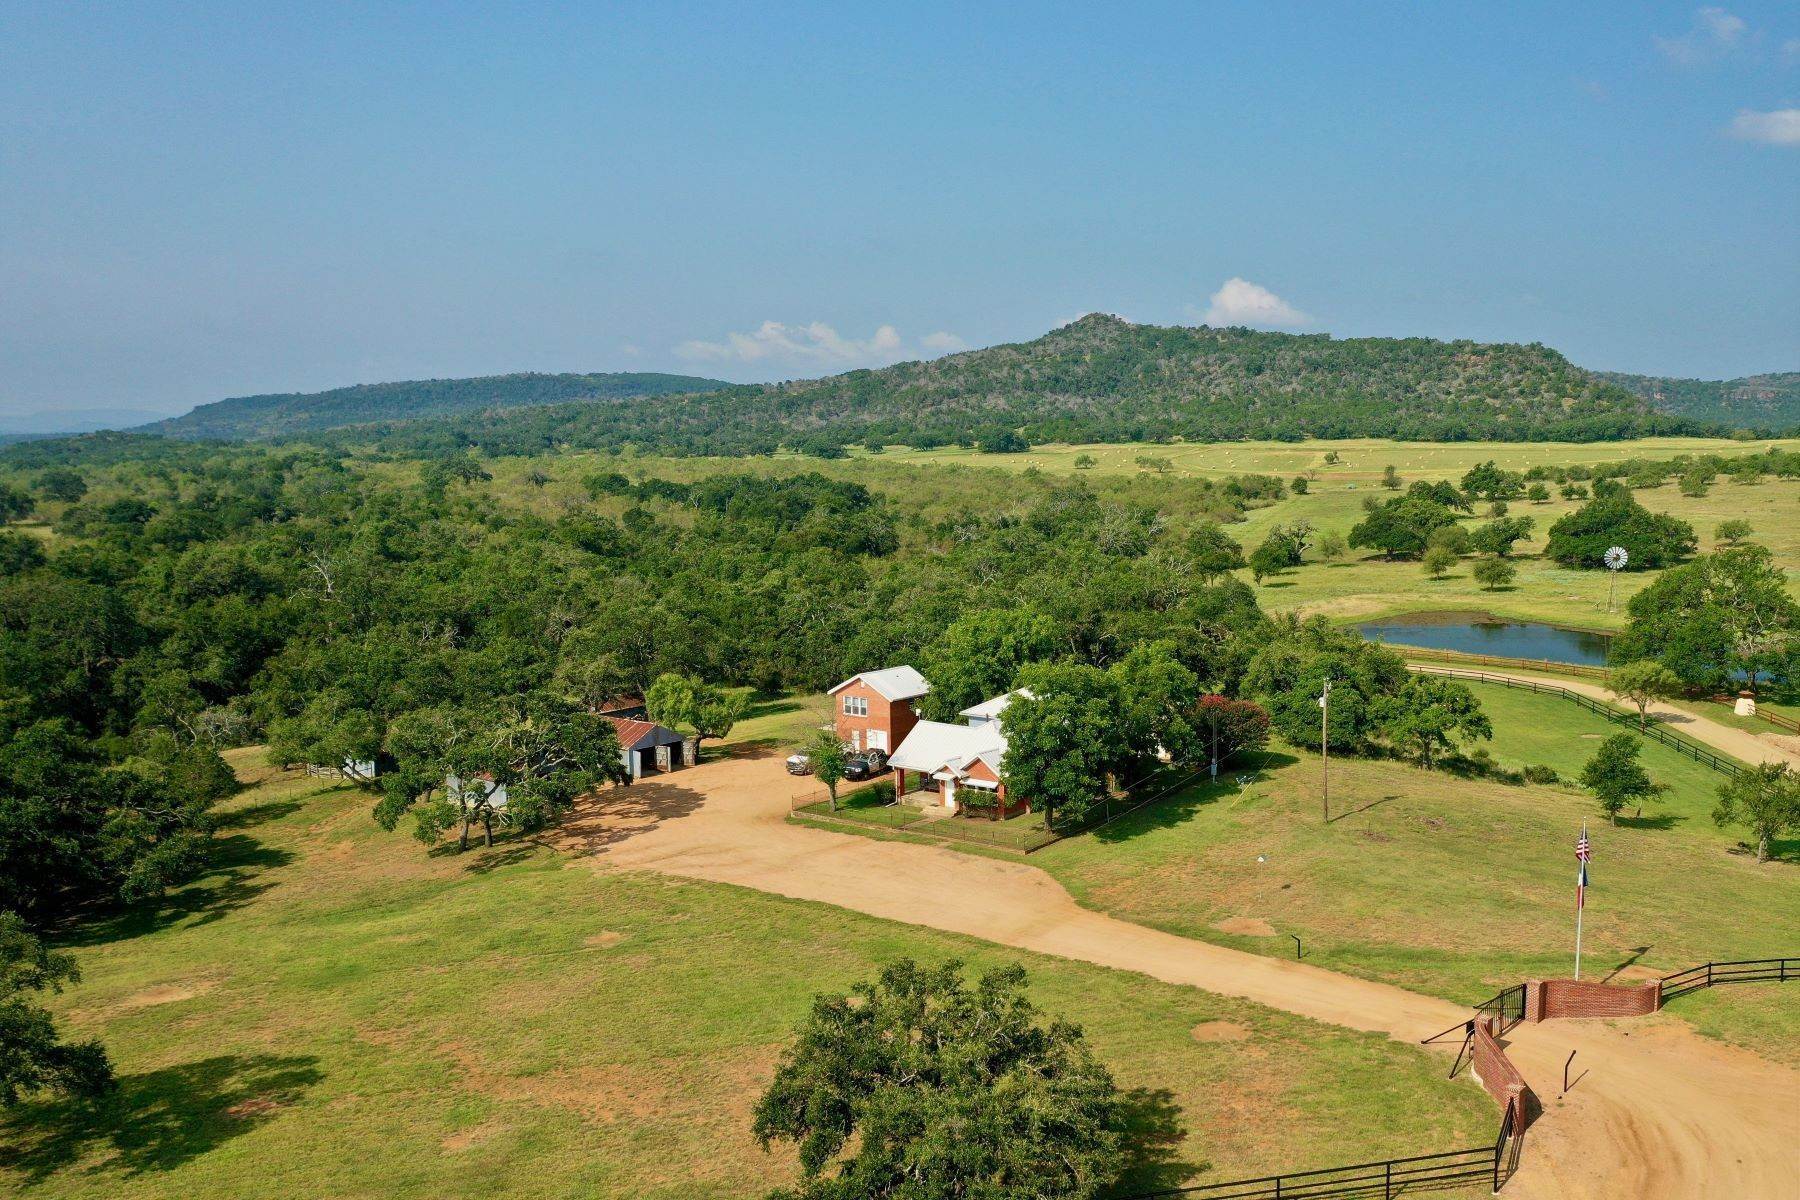 Farm and Ranch Properties for Sale at 1,116+/- Acres Barnett Branch Ranch, Llano Co., Llano , TX 78643 1,116+/- Acres Barnett Branch Ranch, Llano Co. Llano, Texas 78643 United States